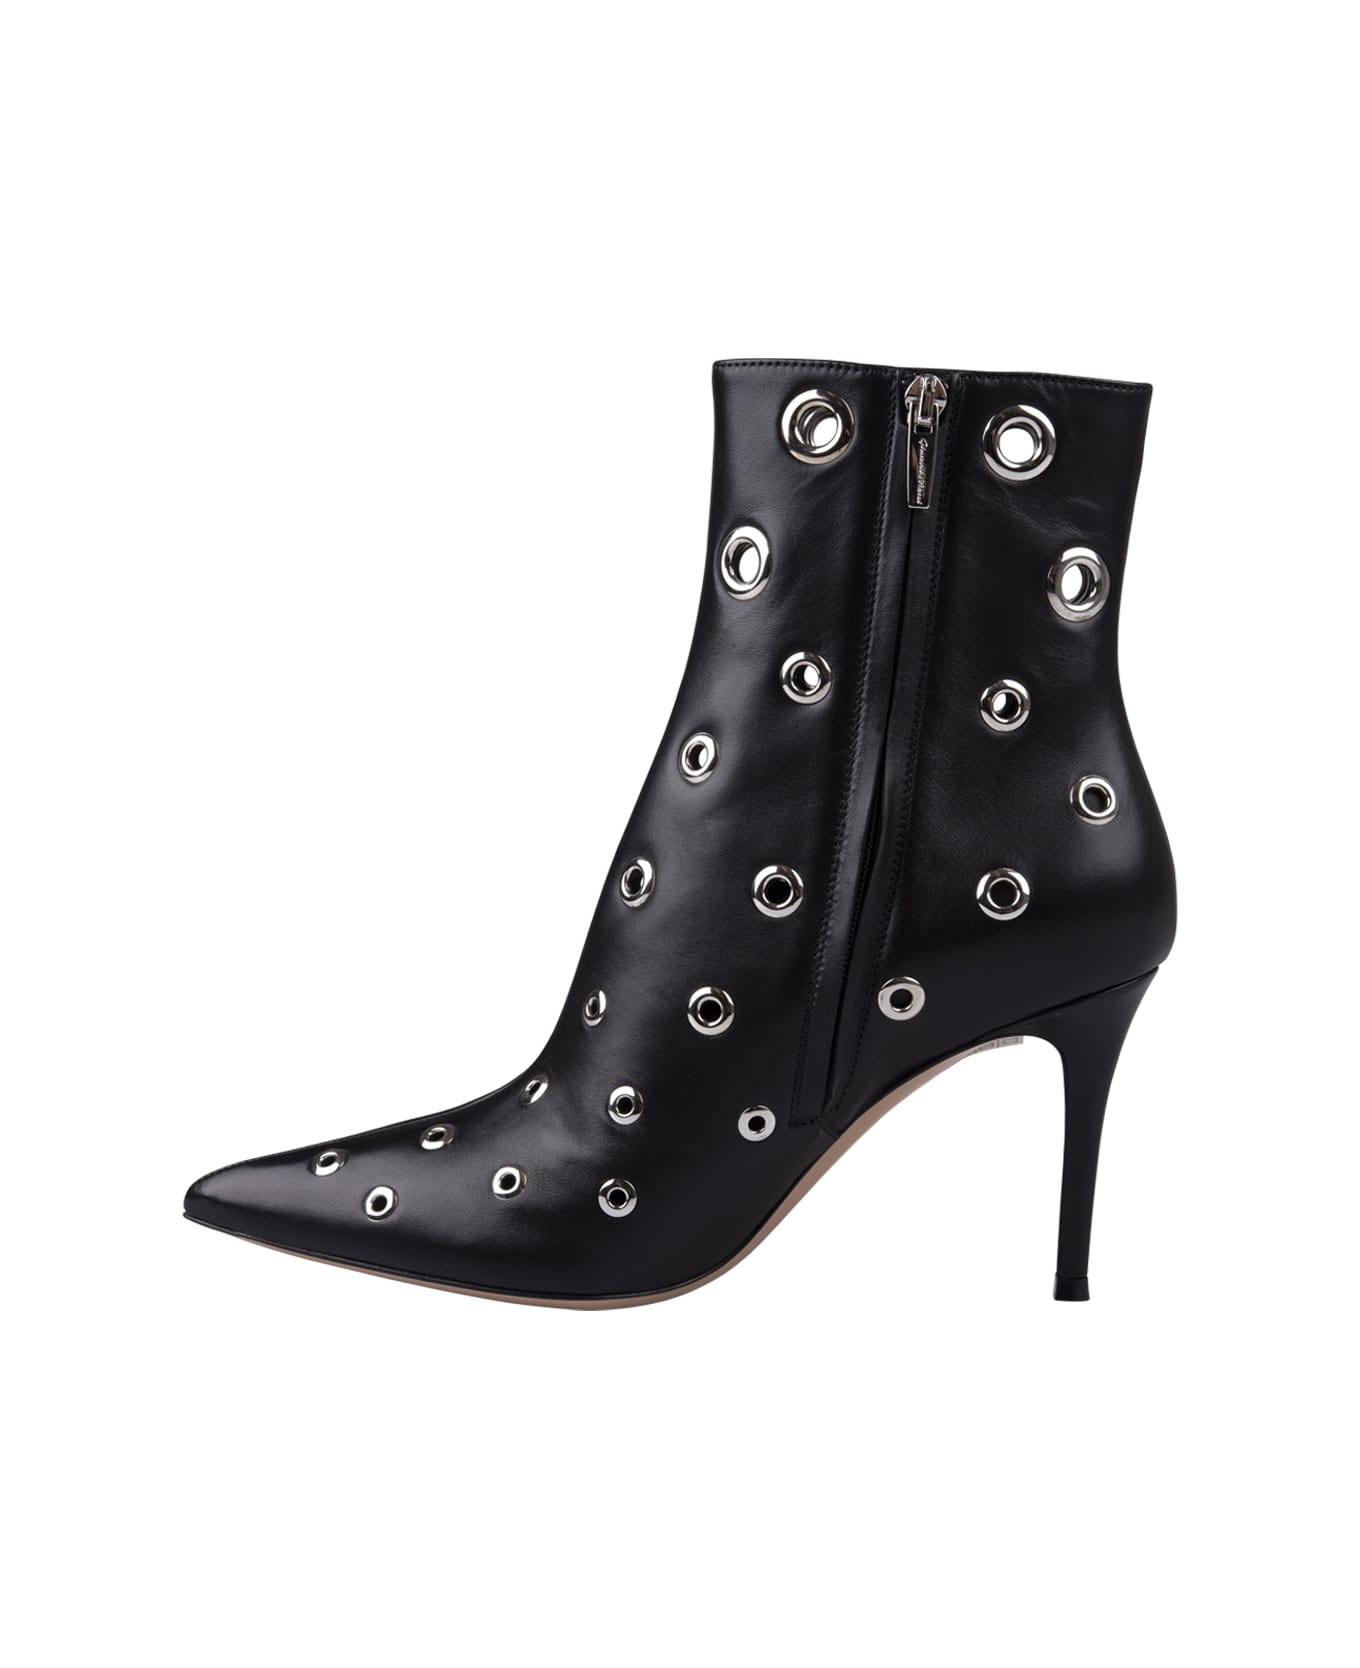 Gianvito Rossi Lydia Bootie 85 Ankle Boots In Black - Black